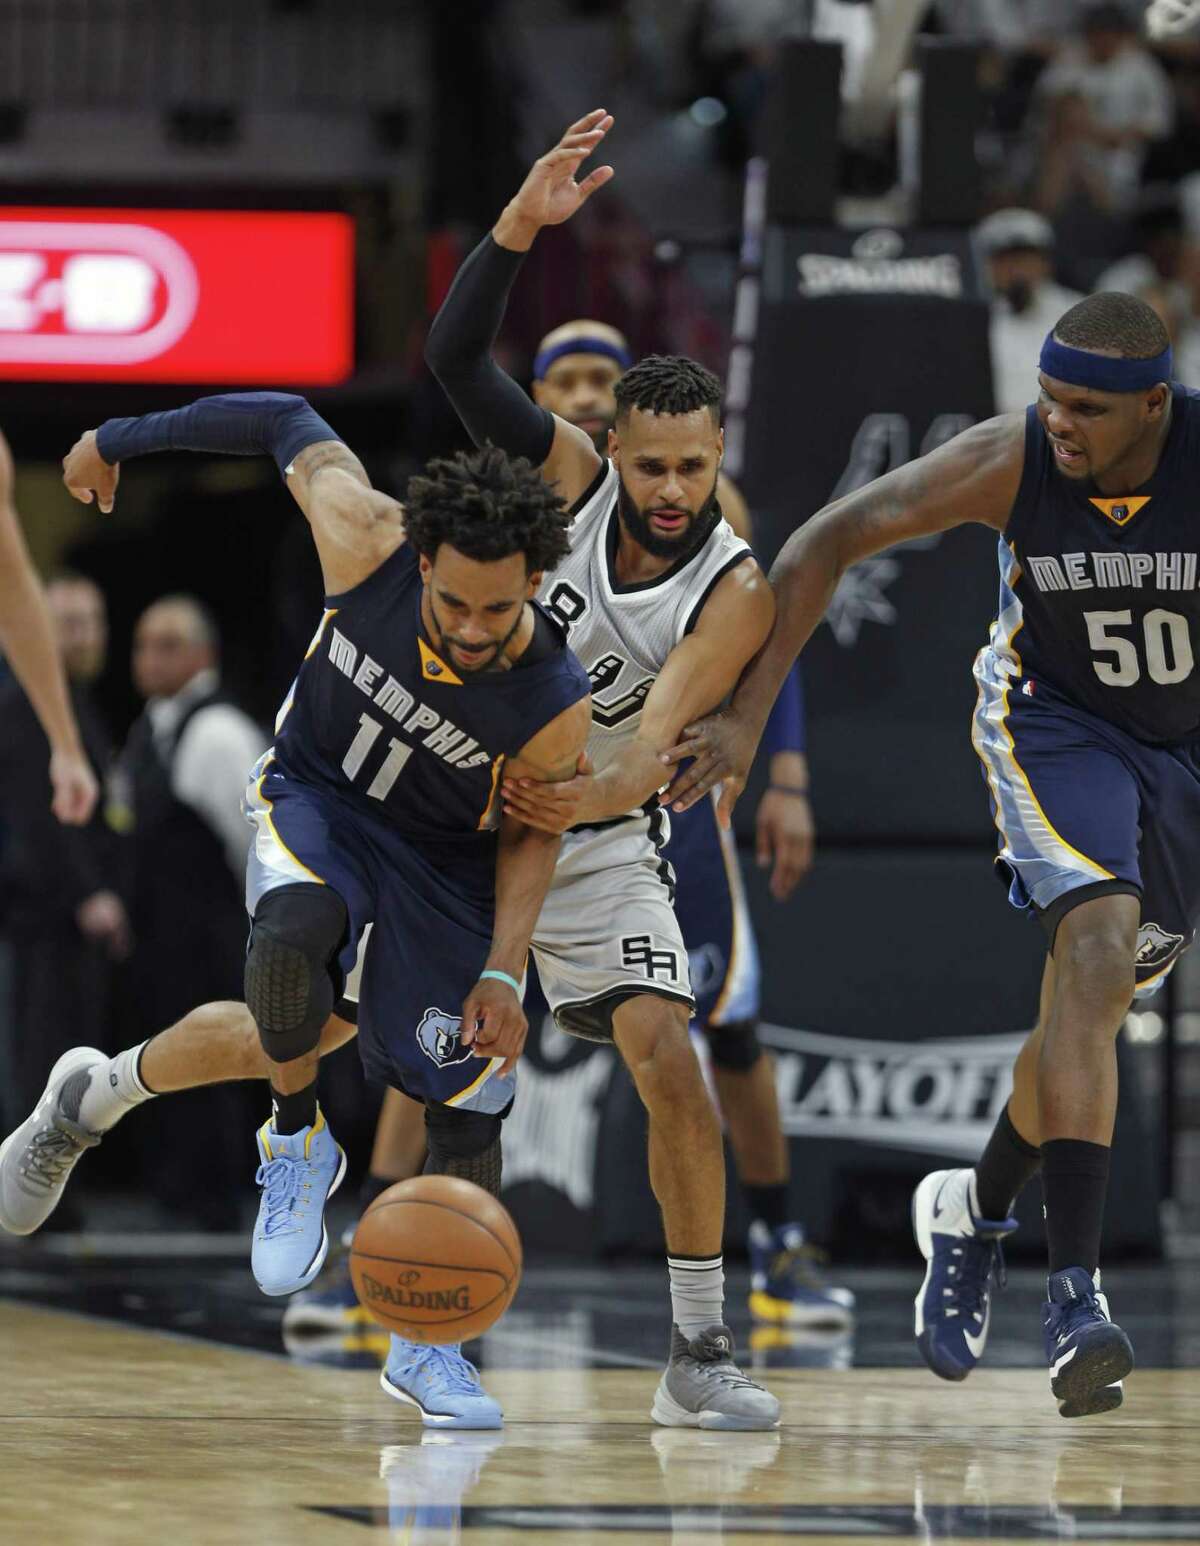 “They showed us what championship-level basketball is, and that’s something we are still learning,” Memphis guard Mike Conley said of the Spurs after the Game 1 blowout.